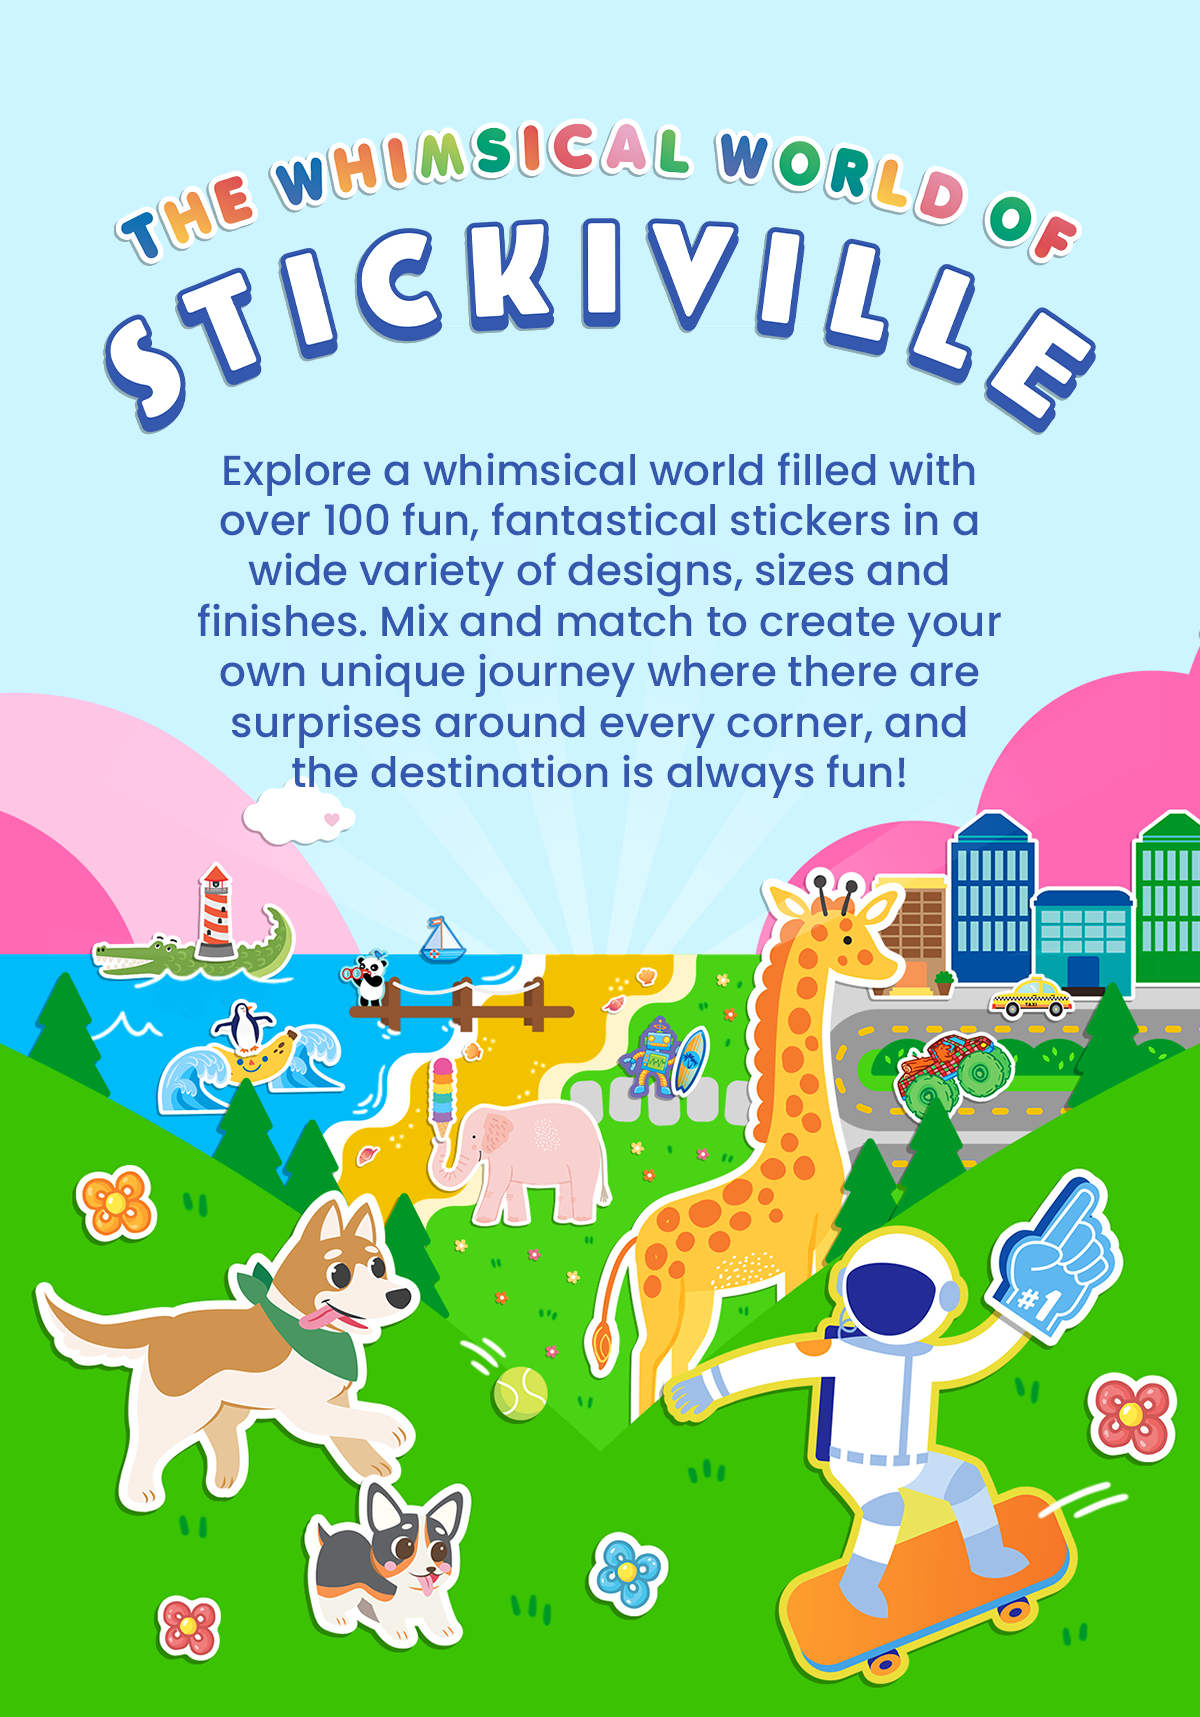 Stickiville Fun Flowers Stickers - OOLY